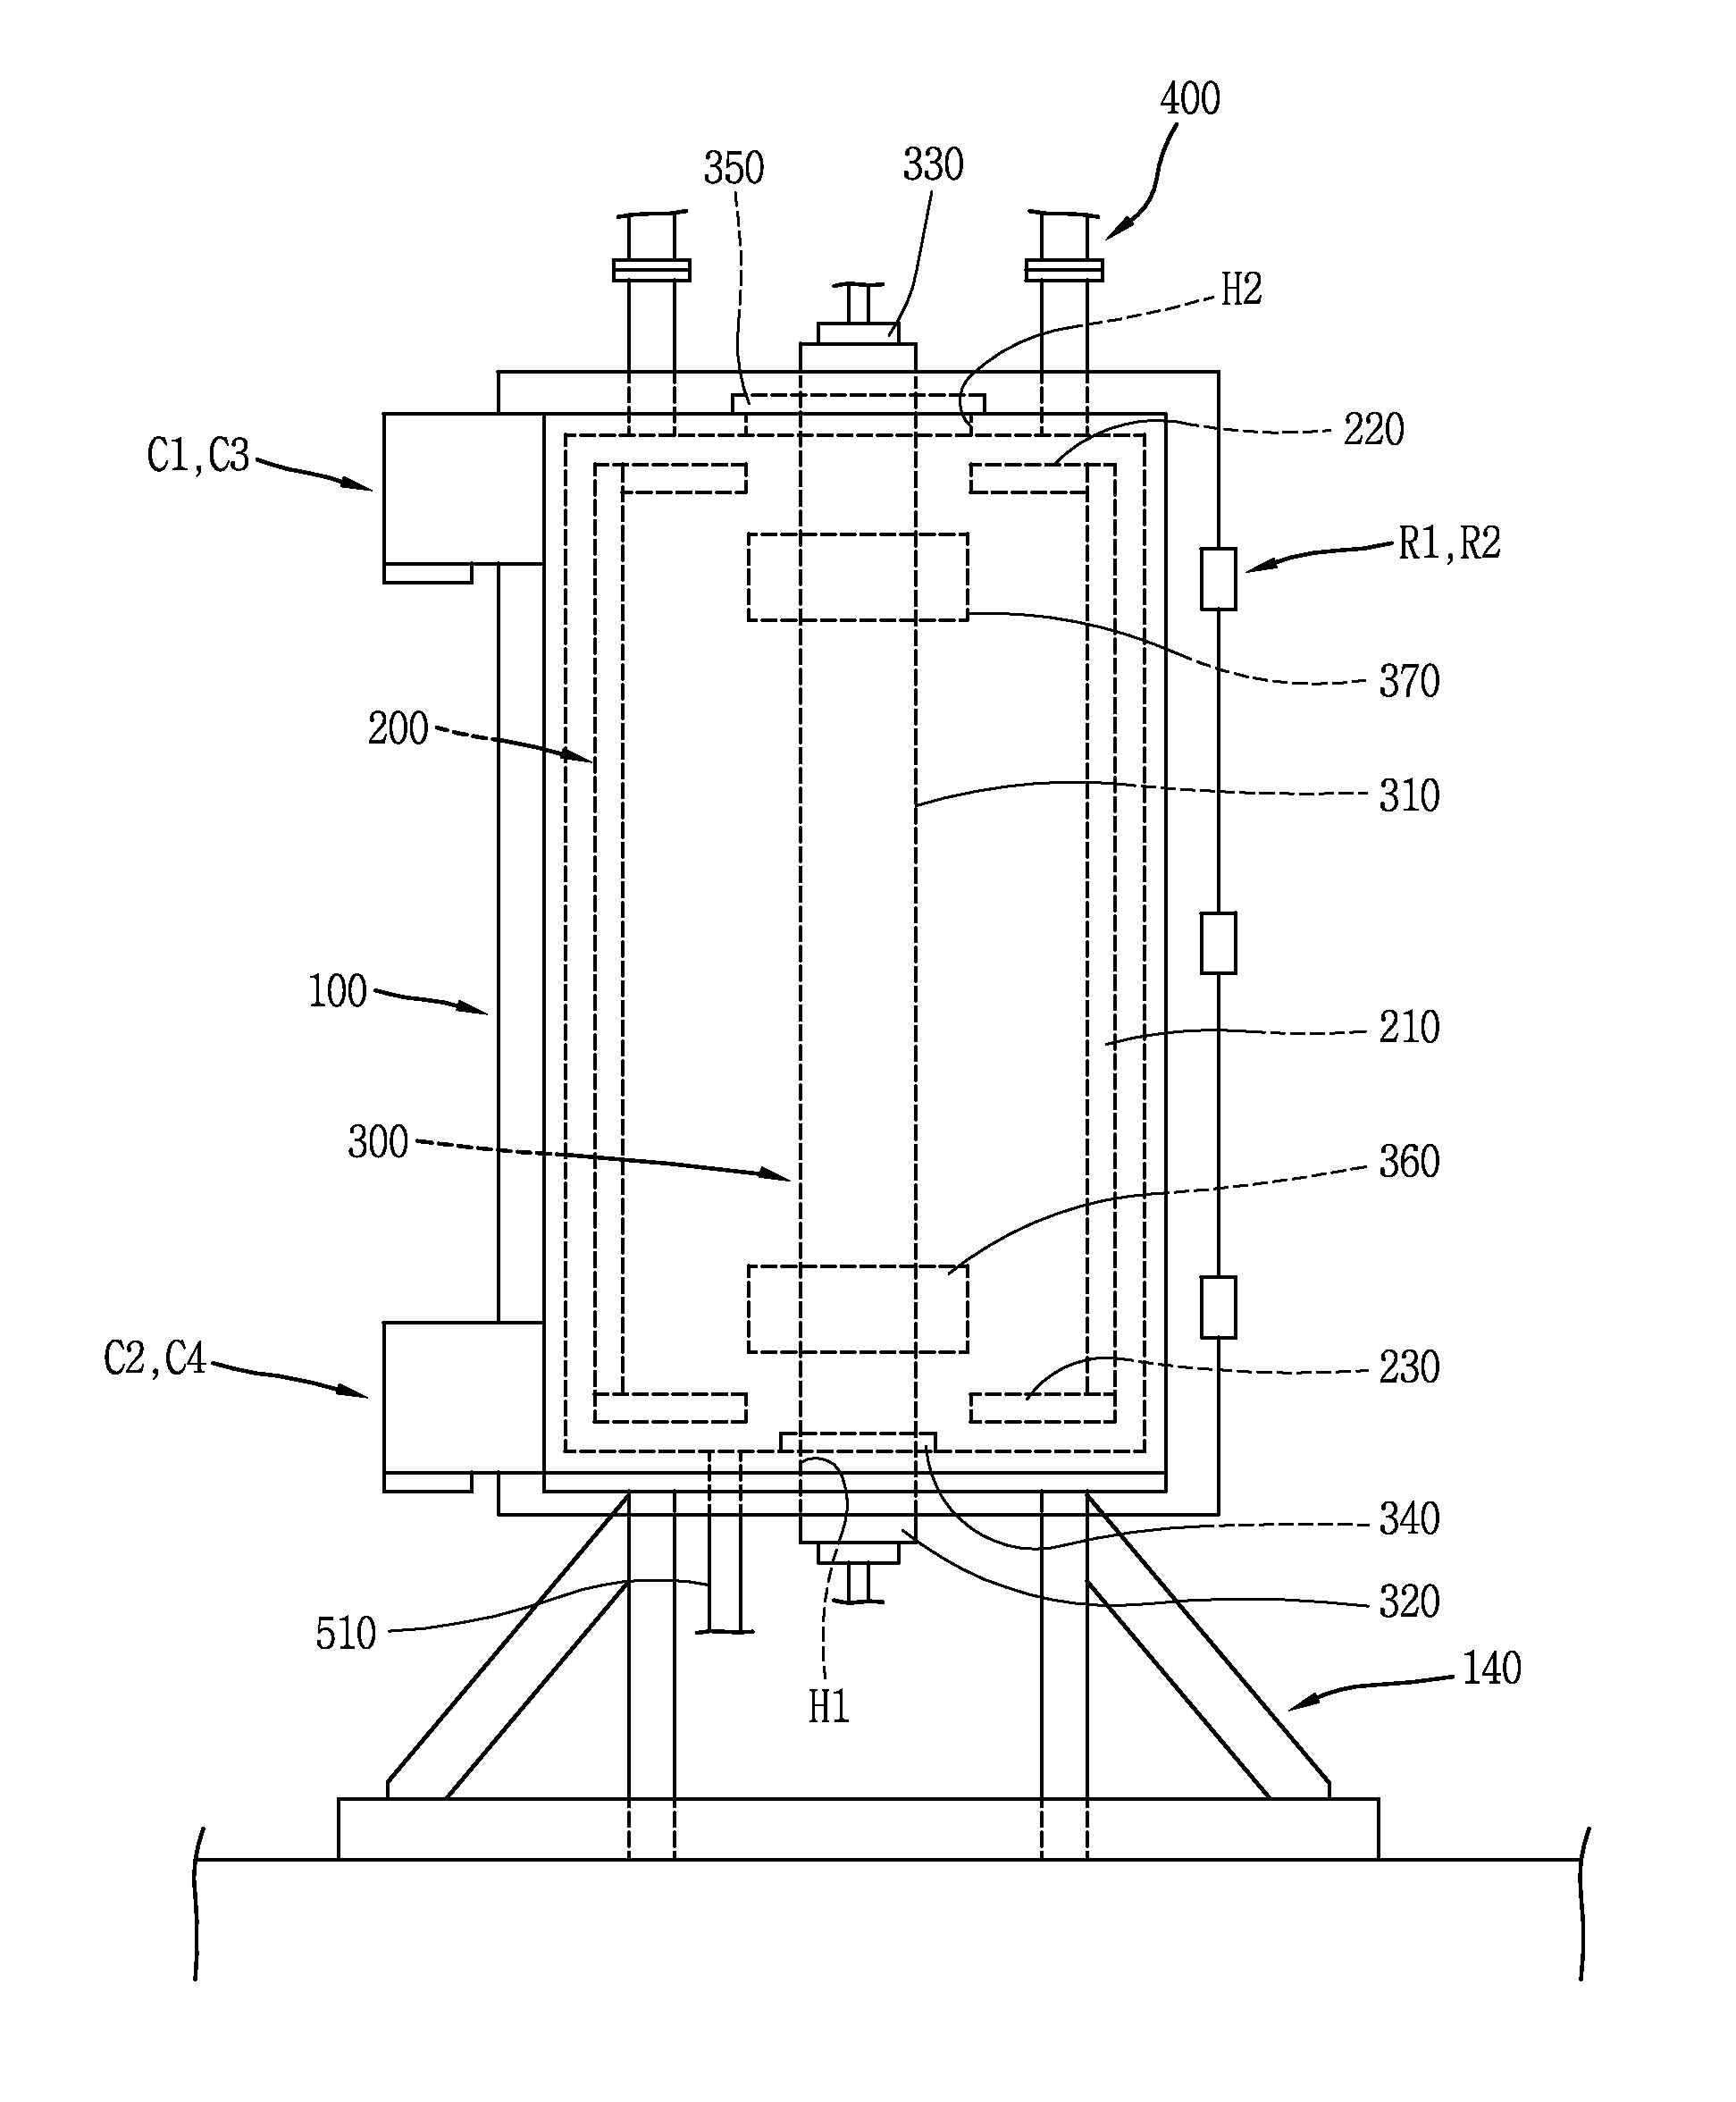 Apparatus for densifying carbon/carbon composite material